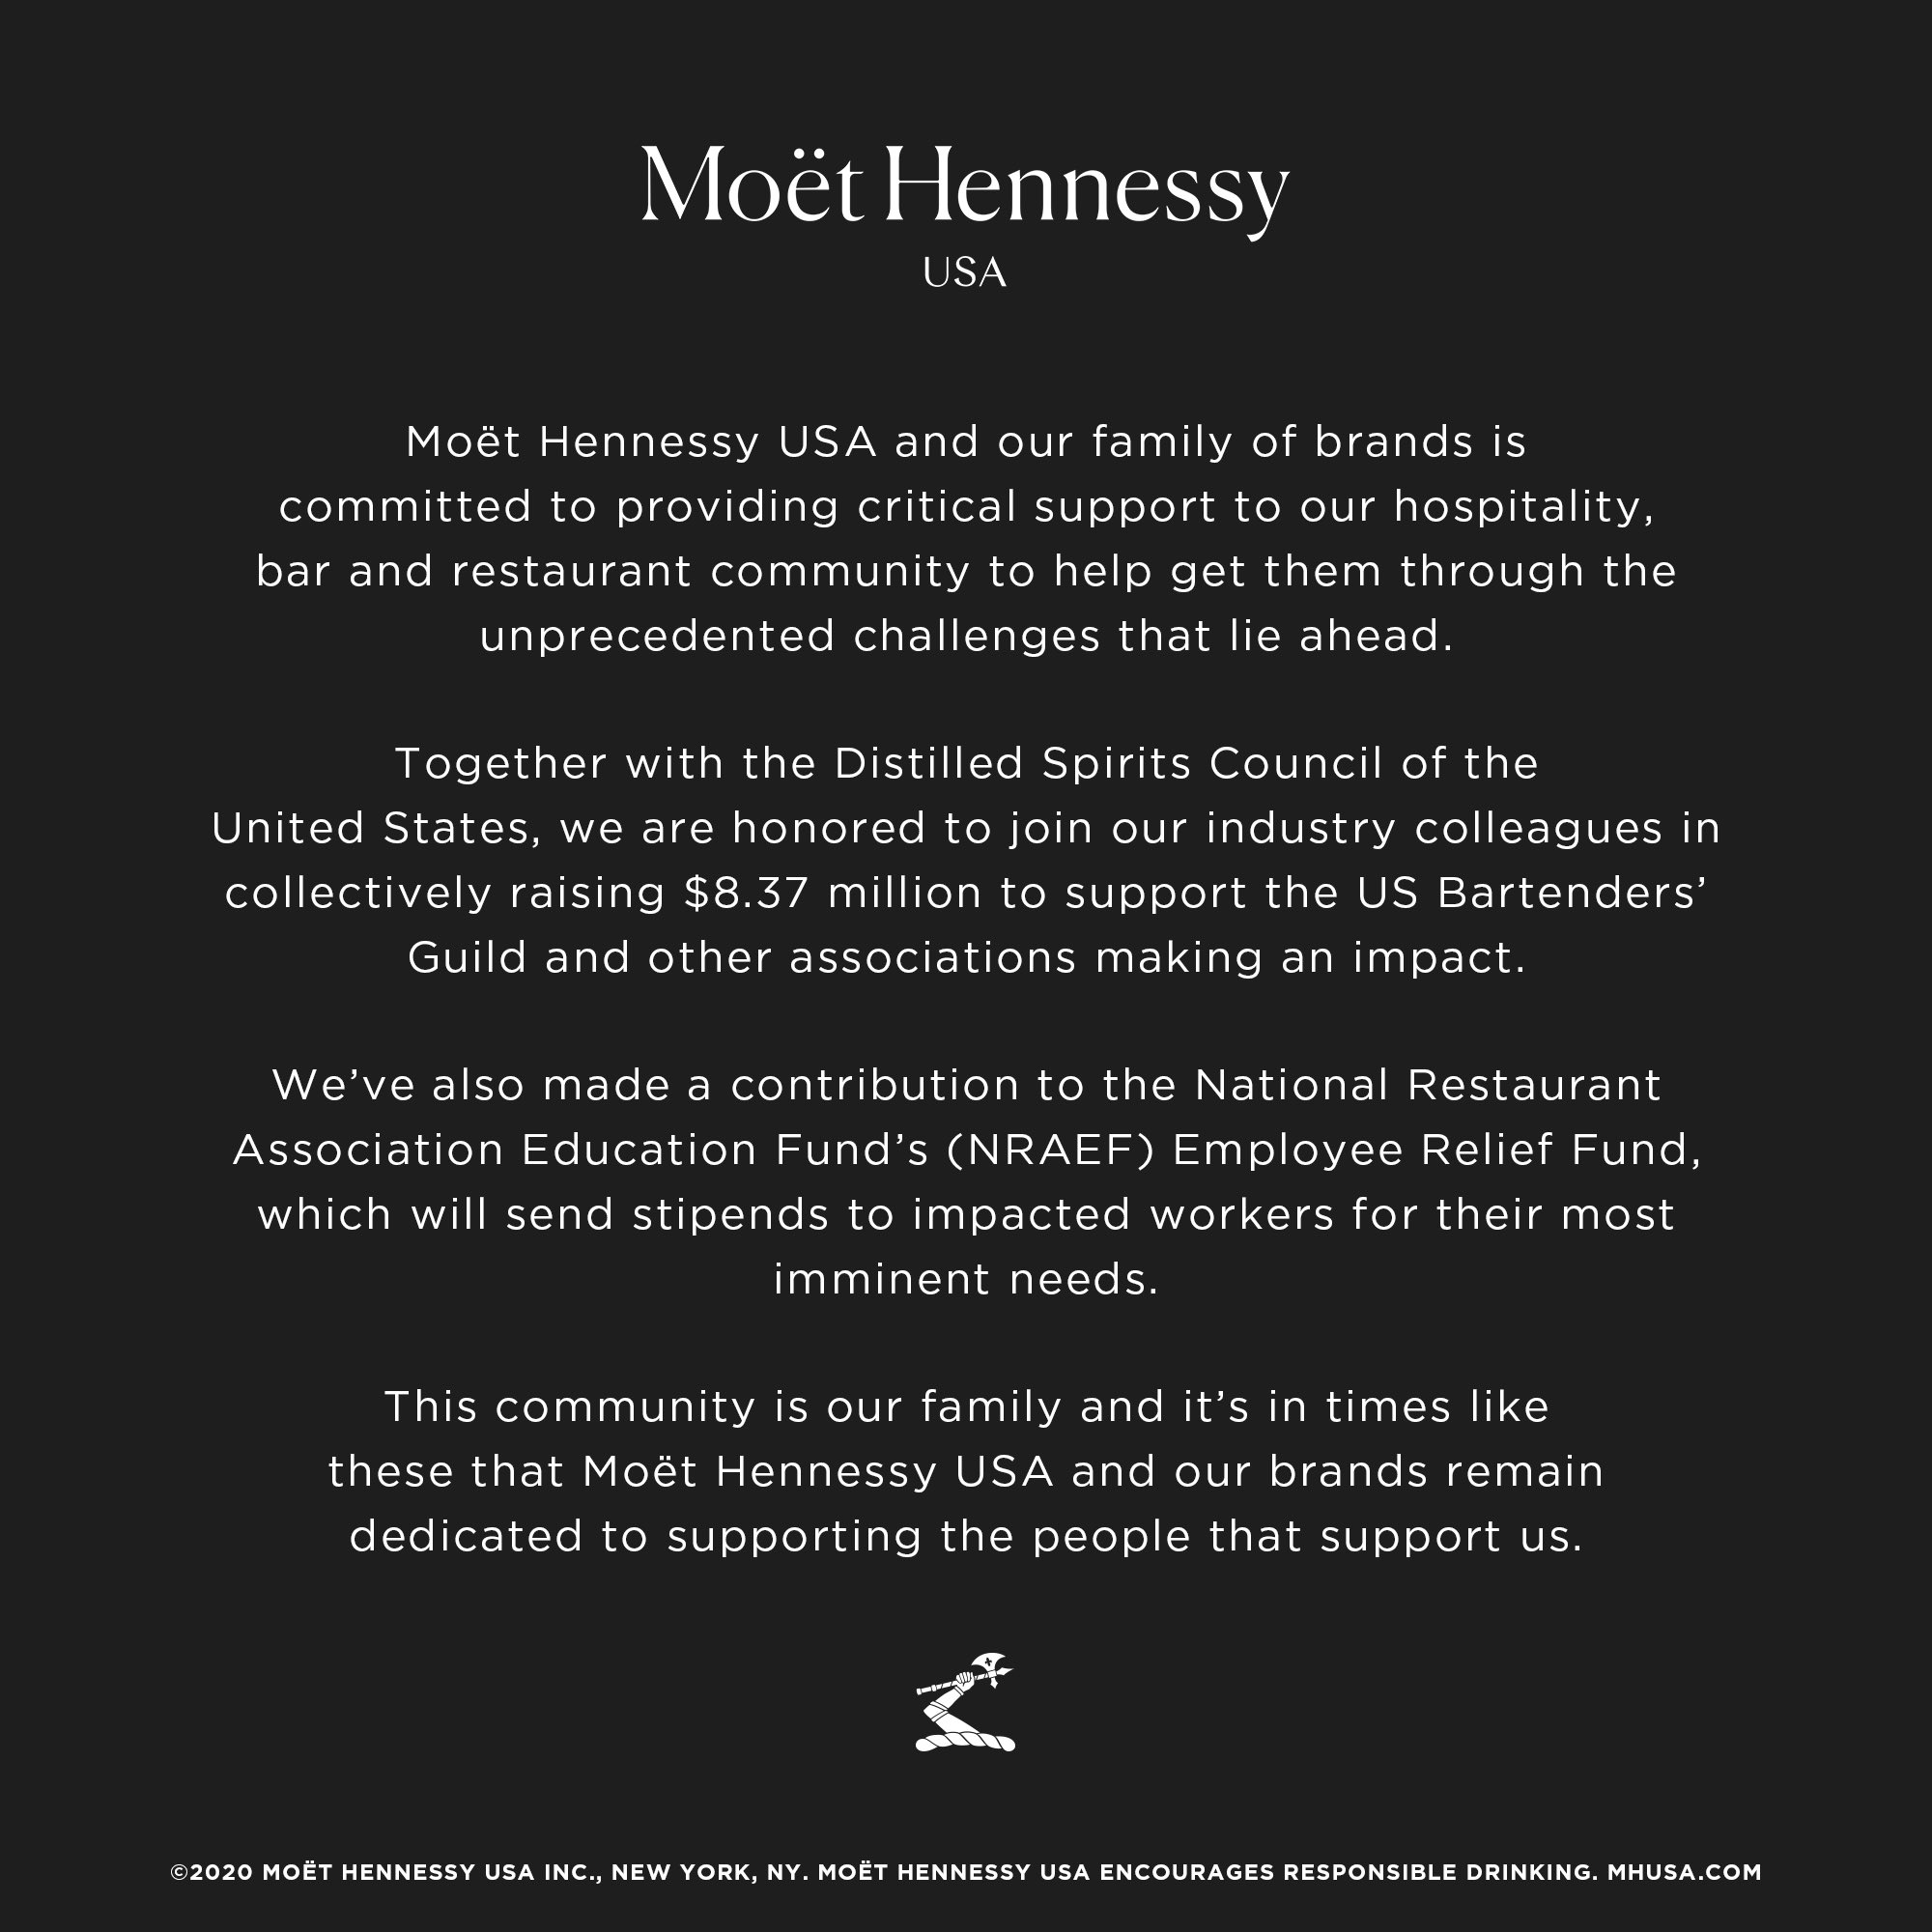 Hennessy on X: A note from the Moët Hennessy USA family… https